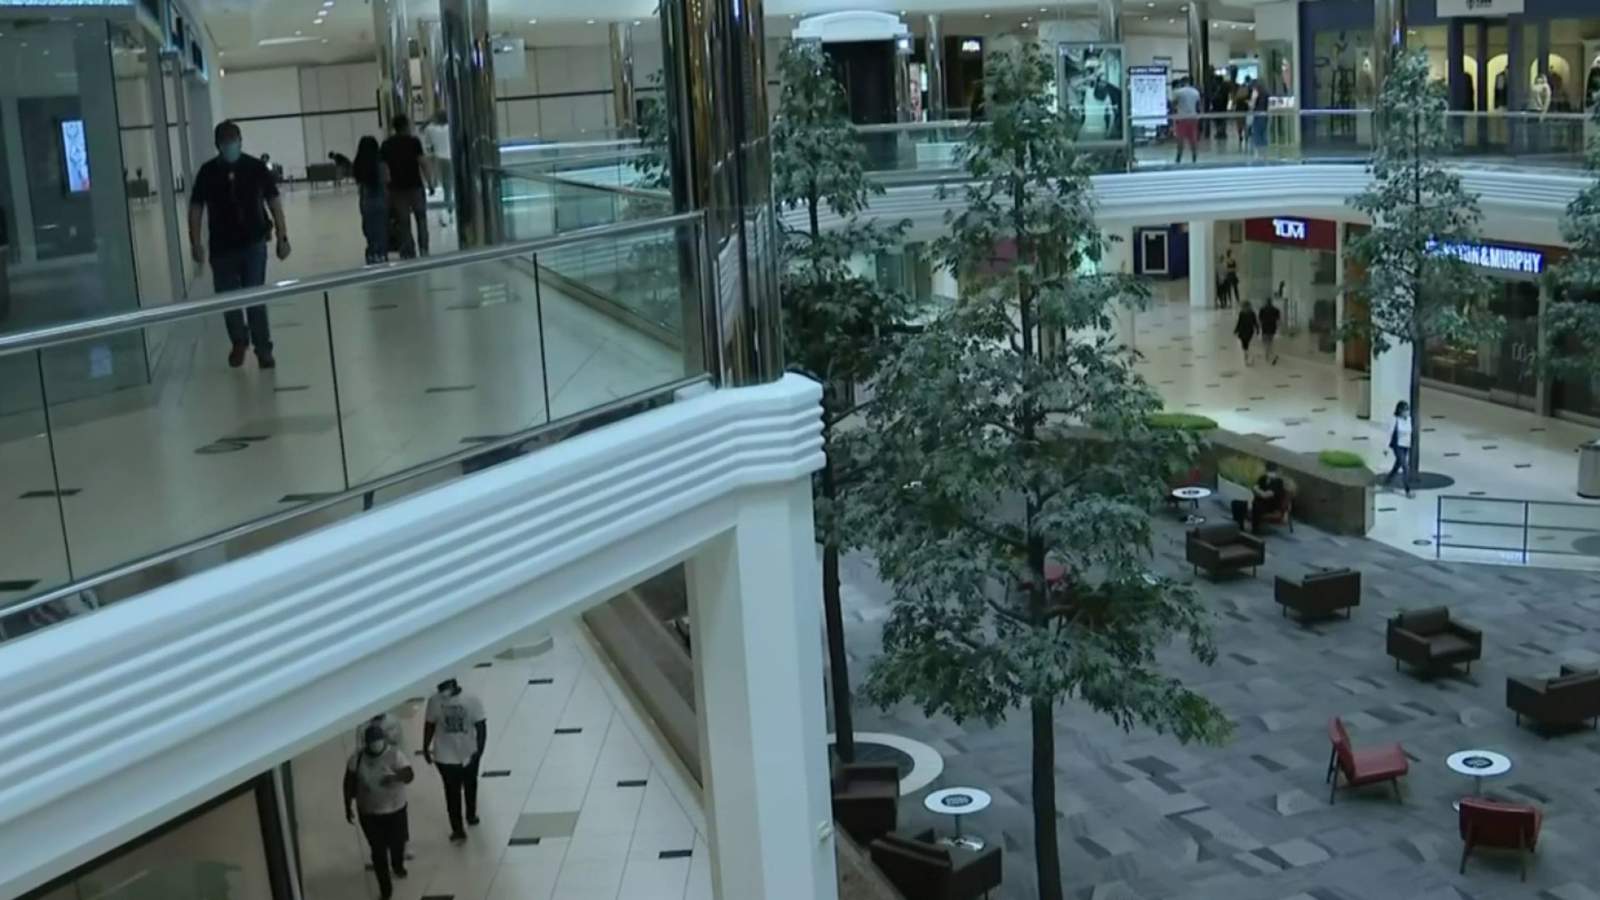 Future of US shopping malls in jeopardy amid ongoing pandemic